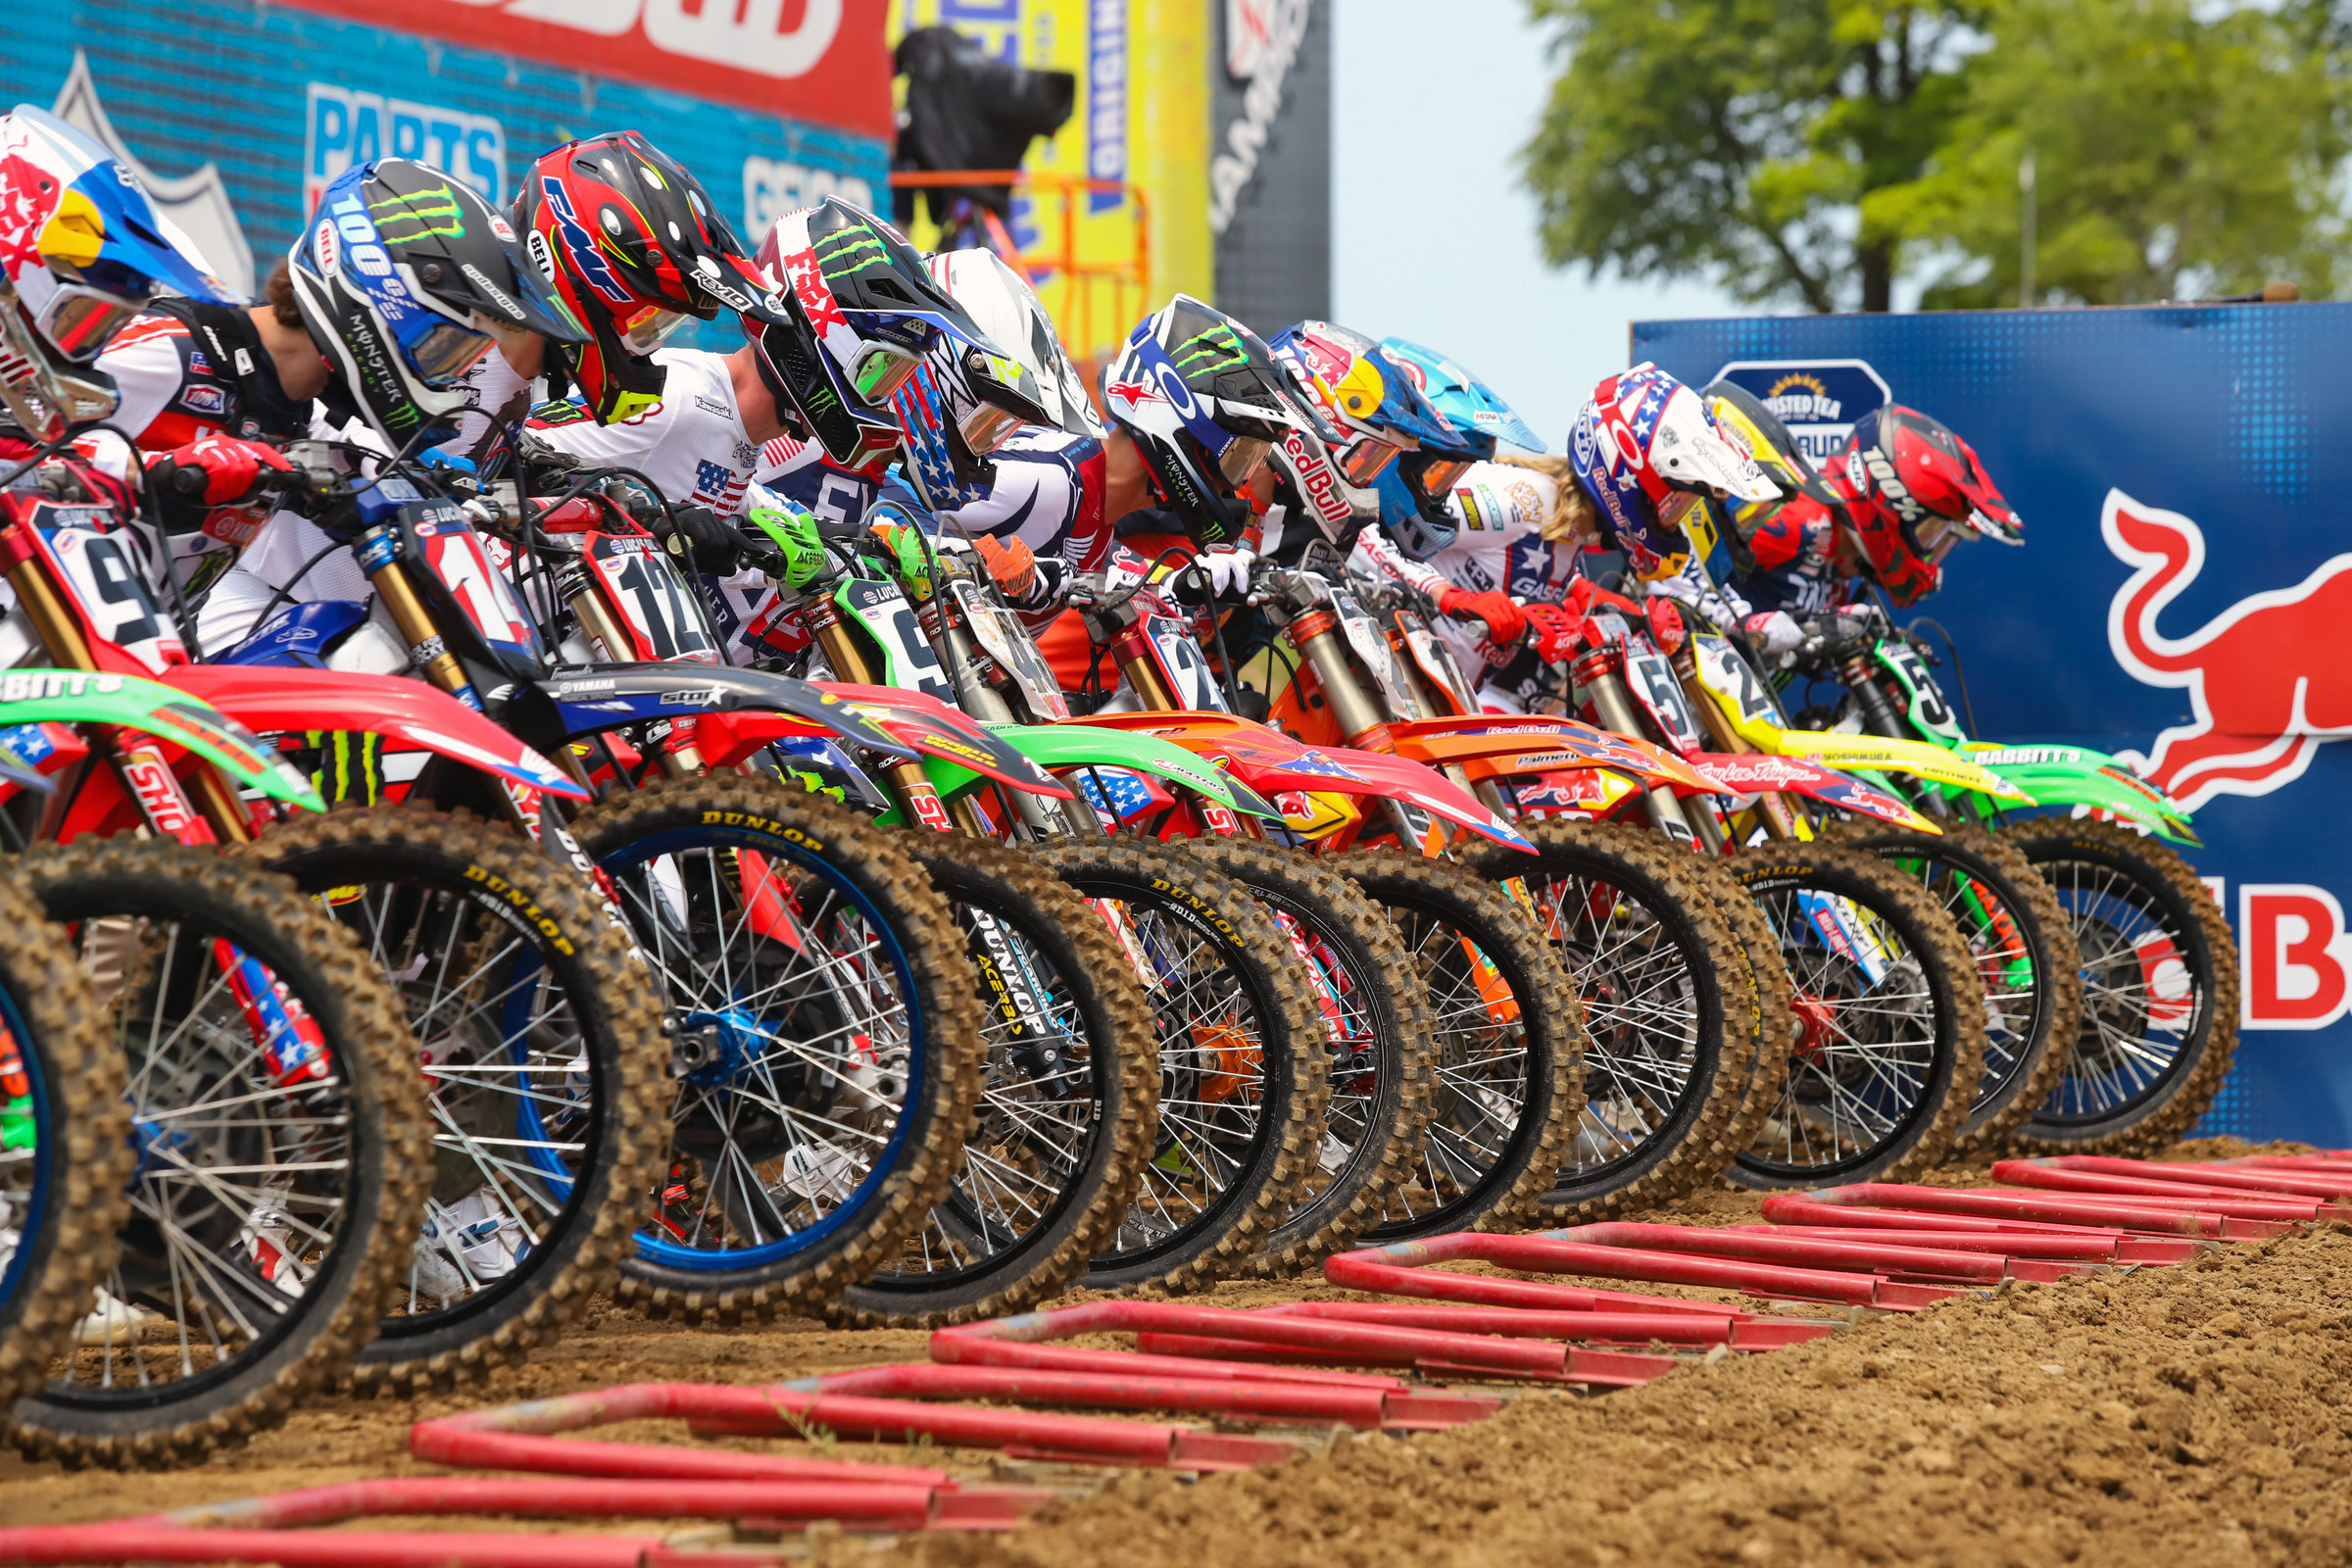 Your Weakest Link: Use It To motocross